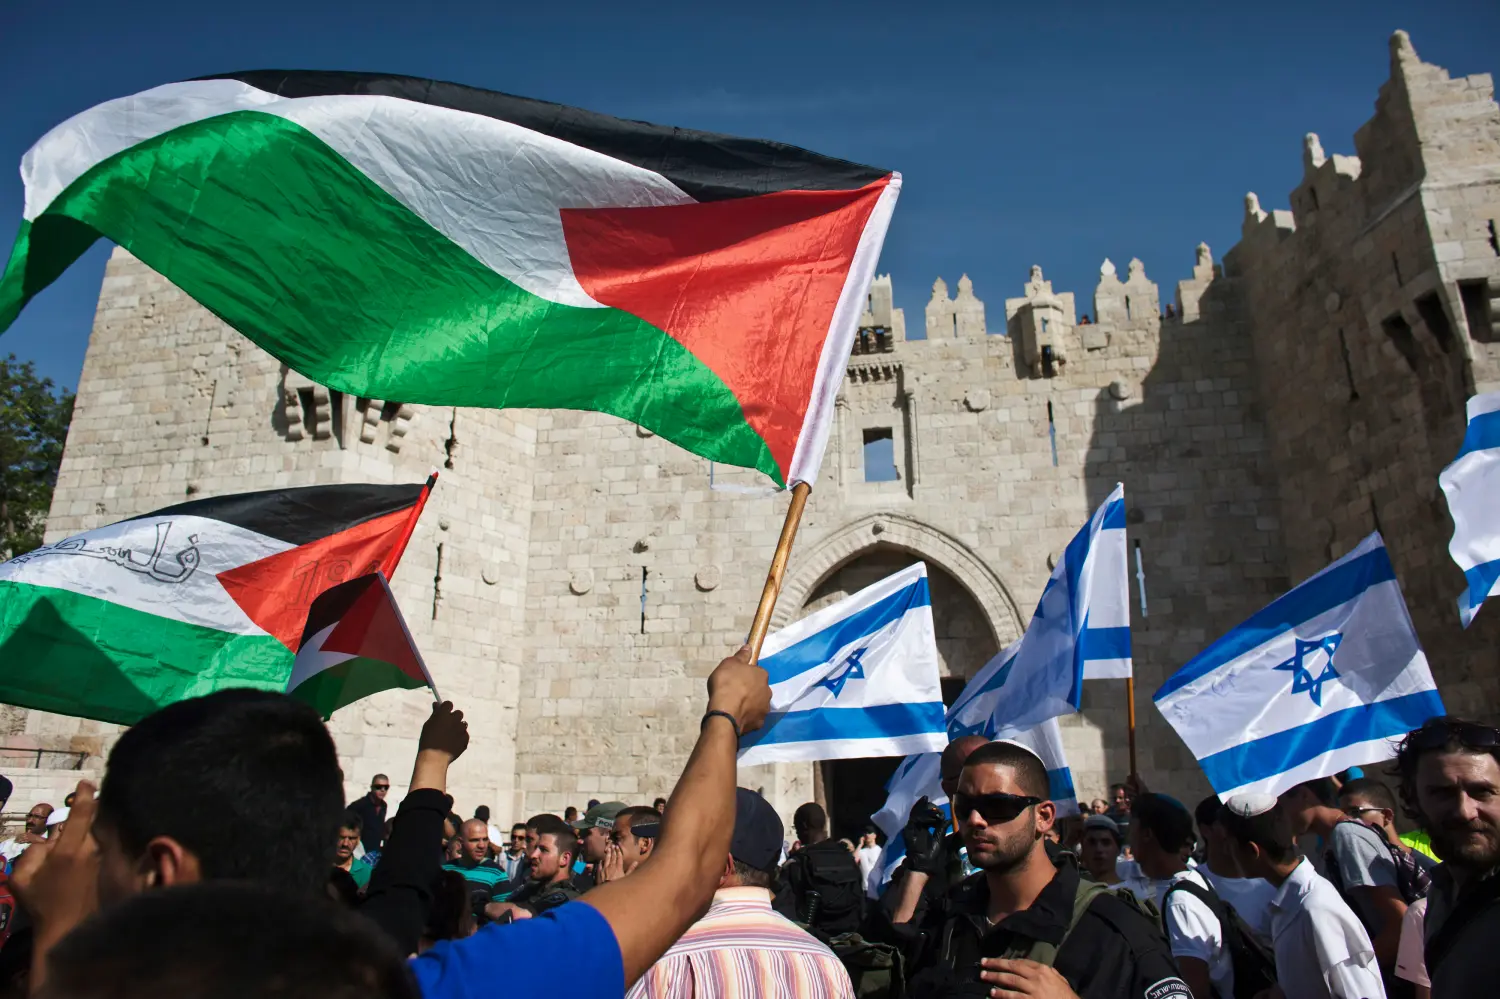 Palestinian and Israeli flags being waved.